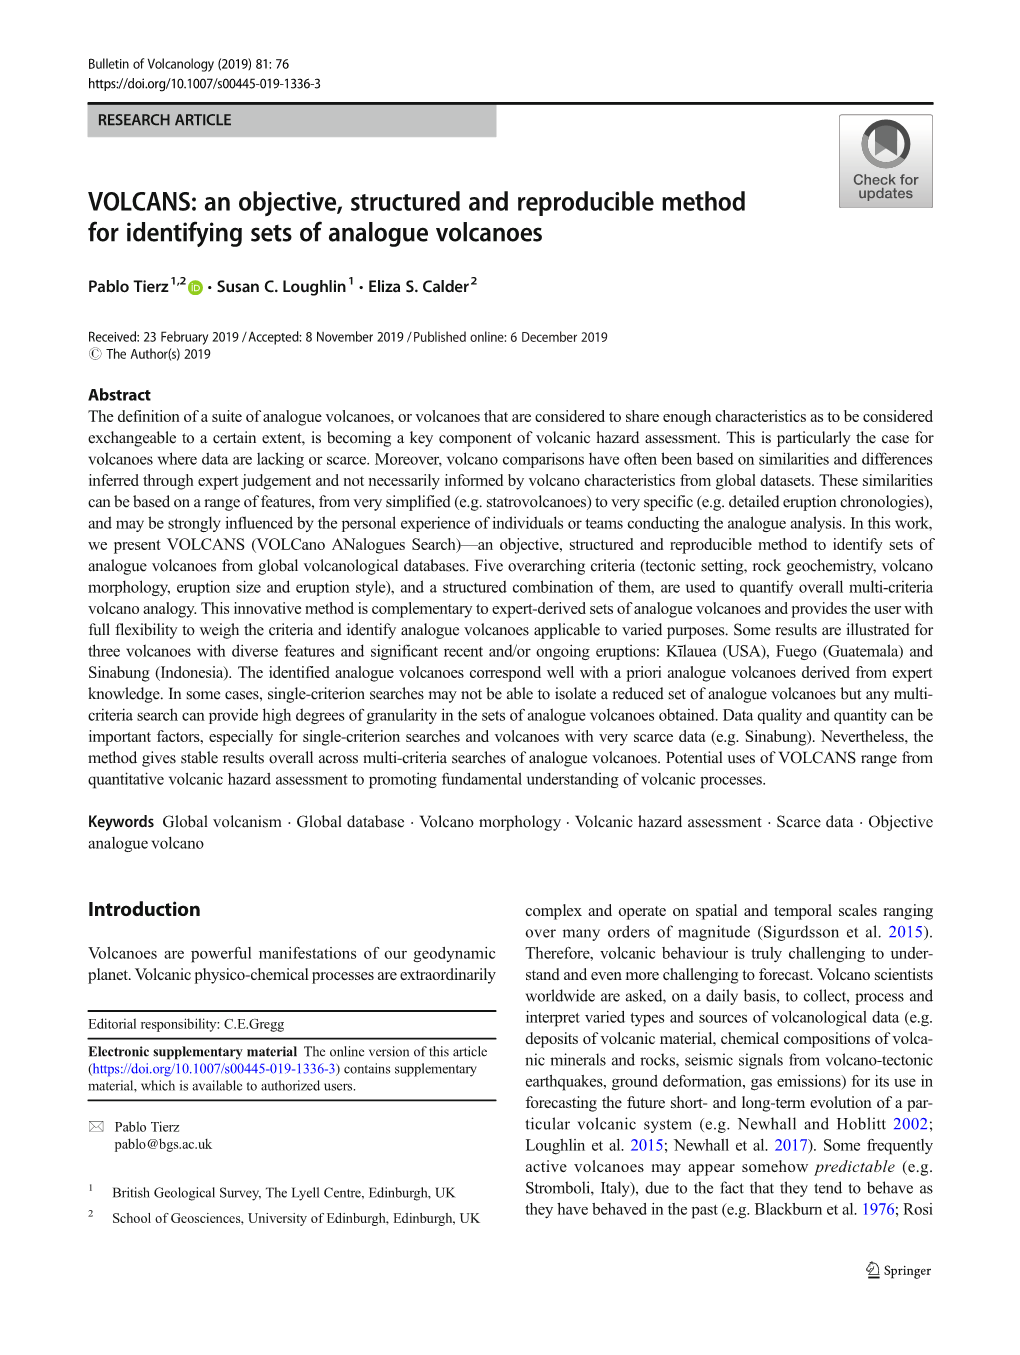 An Objective, Structured and Reproducible Method for Identifying Sets of Analogue Volcanoes